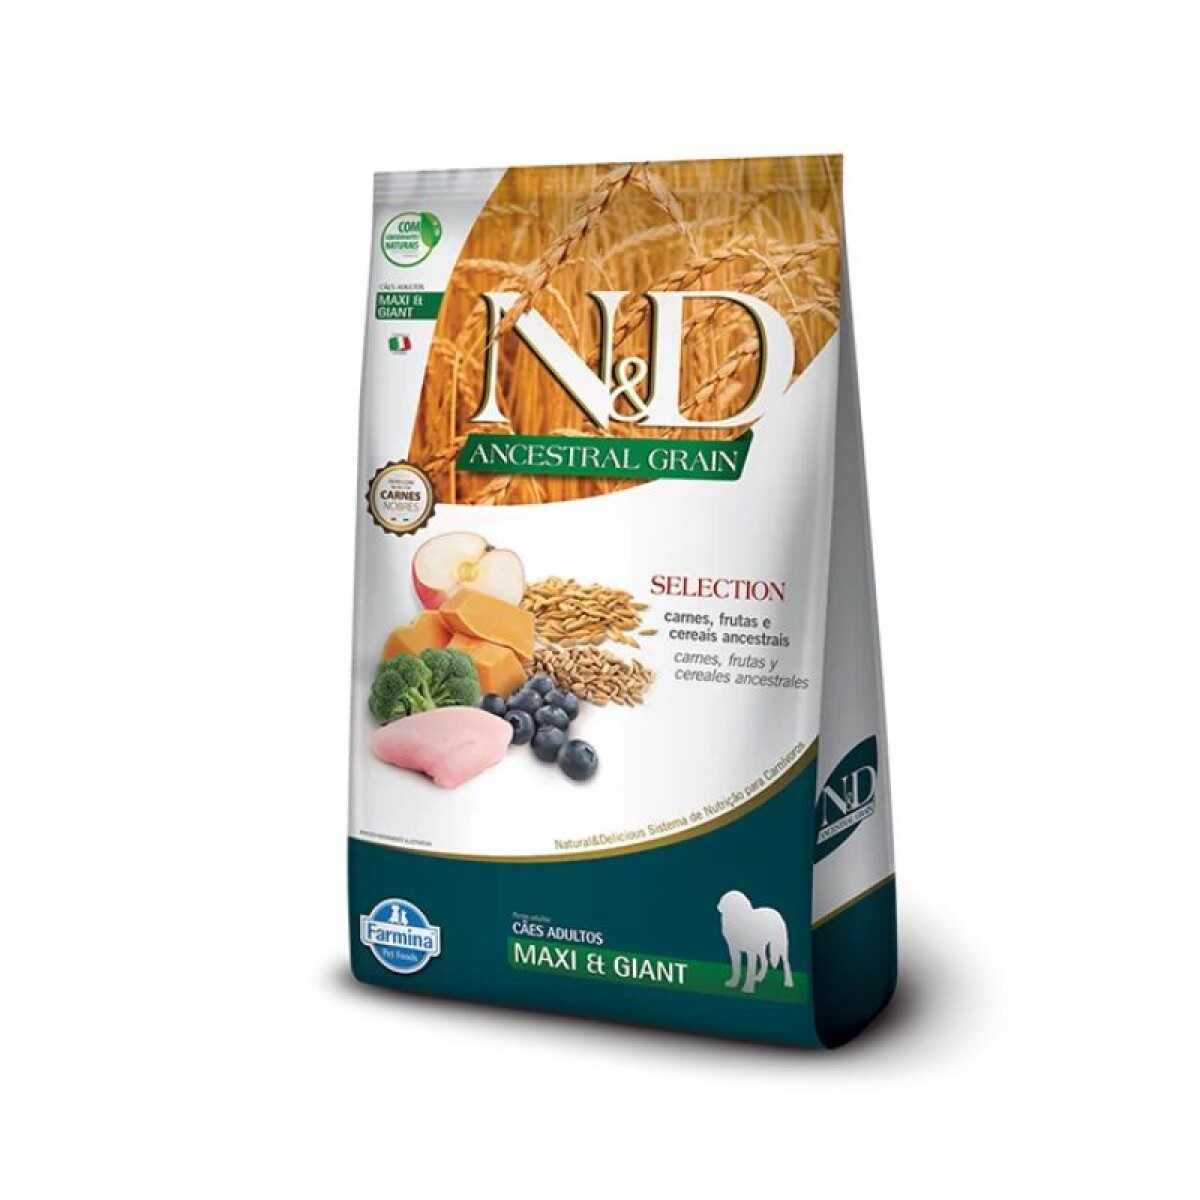 ND ANCESTRAL CAN ADULTO MAX 15 KG - Nd Ancestral Can Adulto Max 15 Kg 